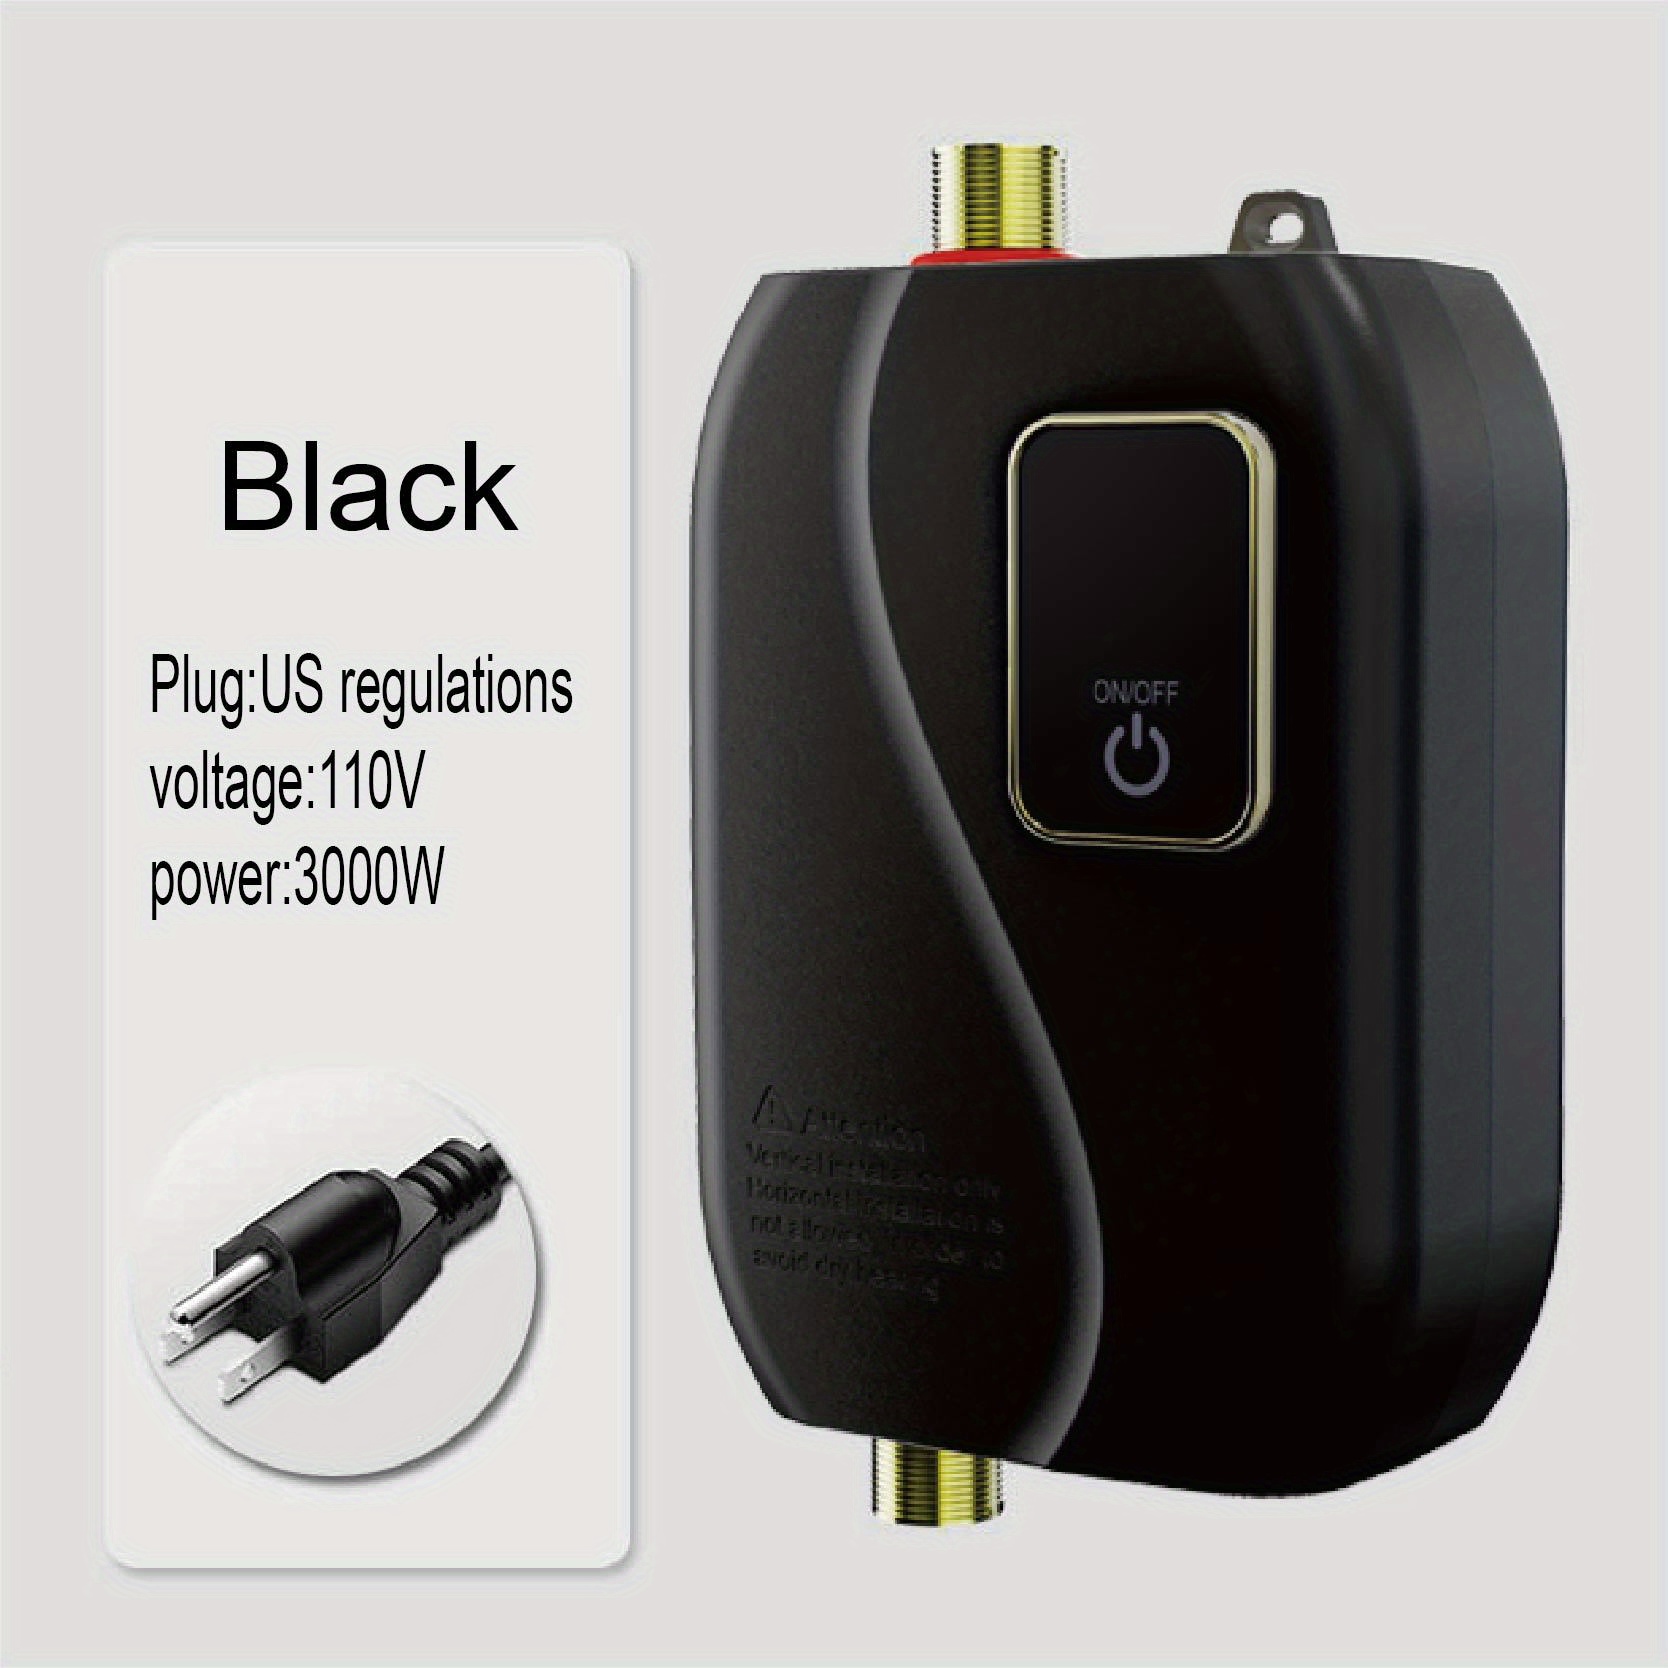 New 110V Electric Tank Mini Instant Hot Water Heater Bathroom